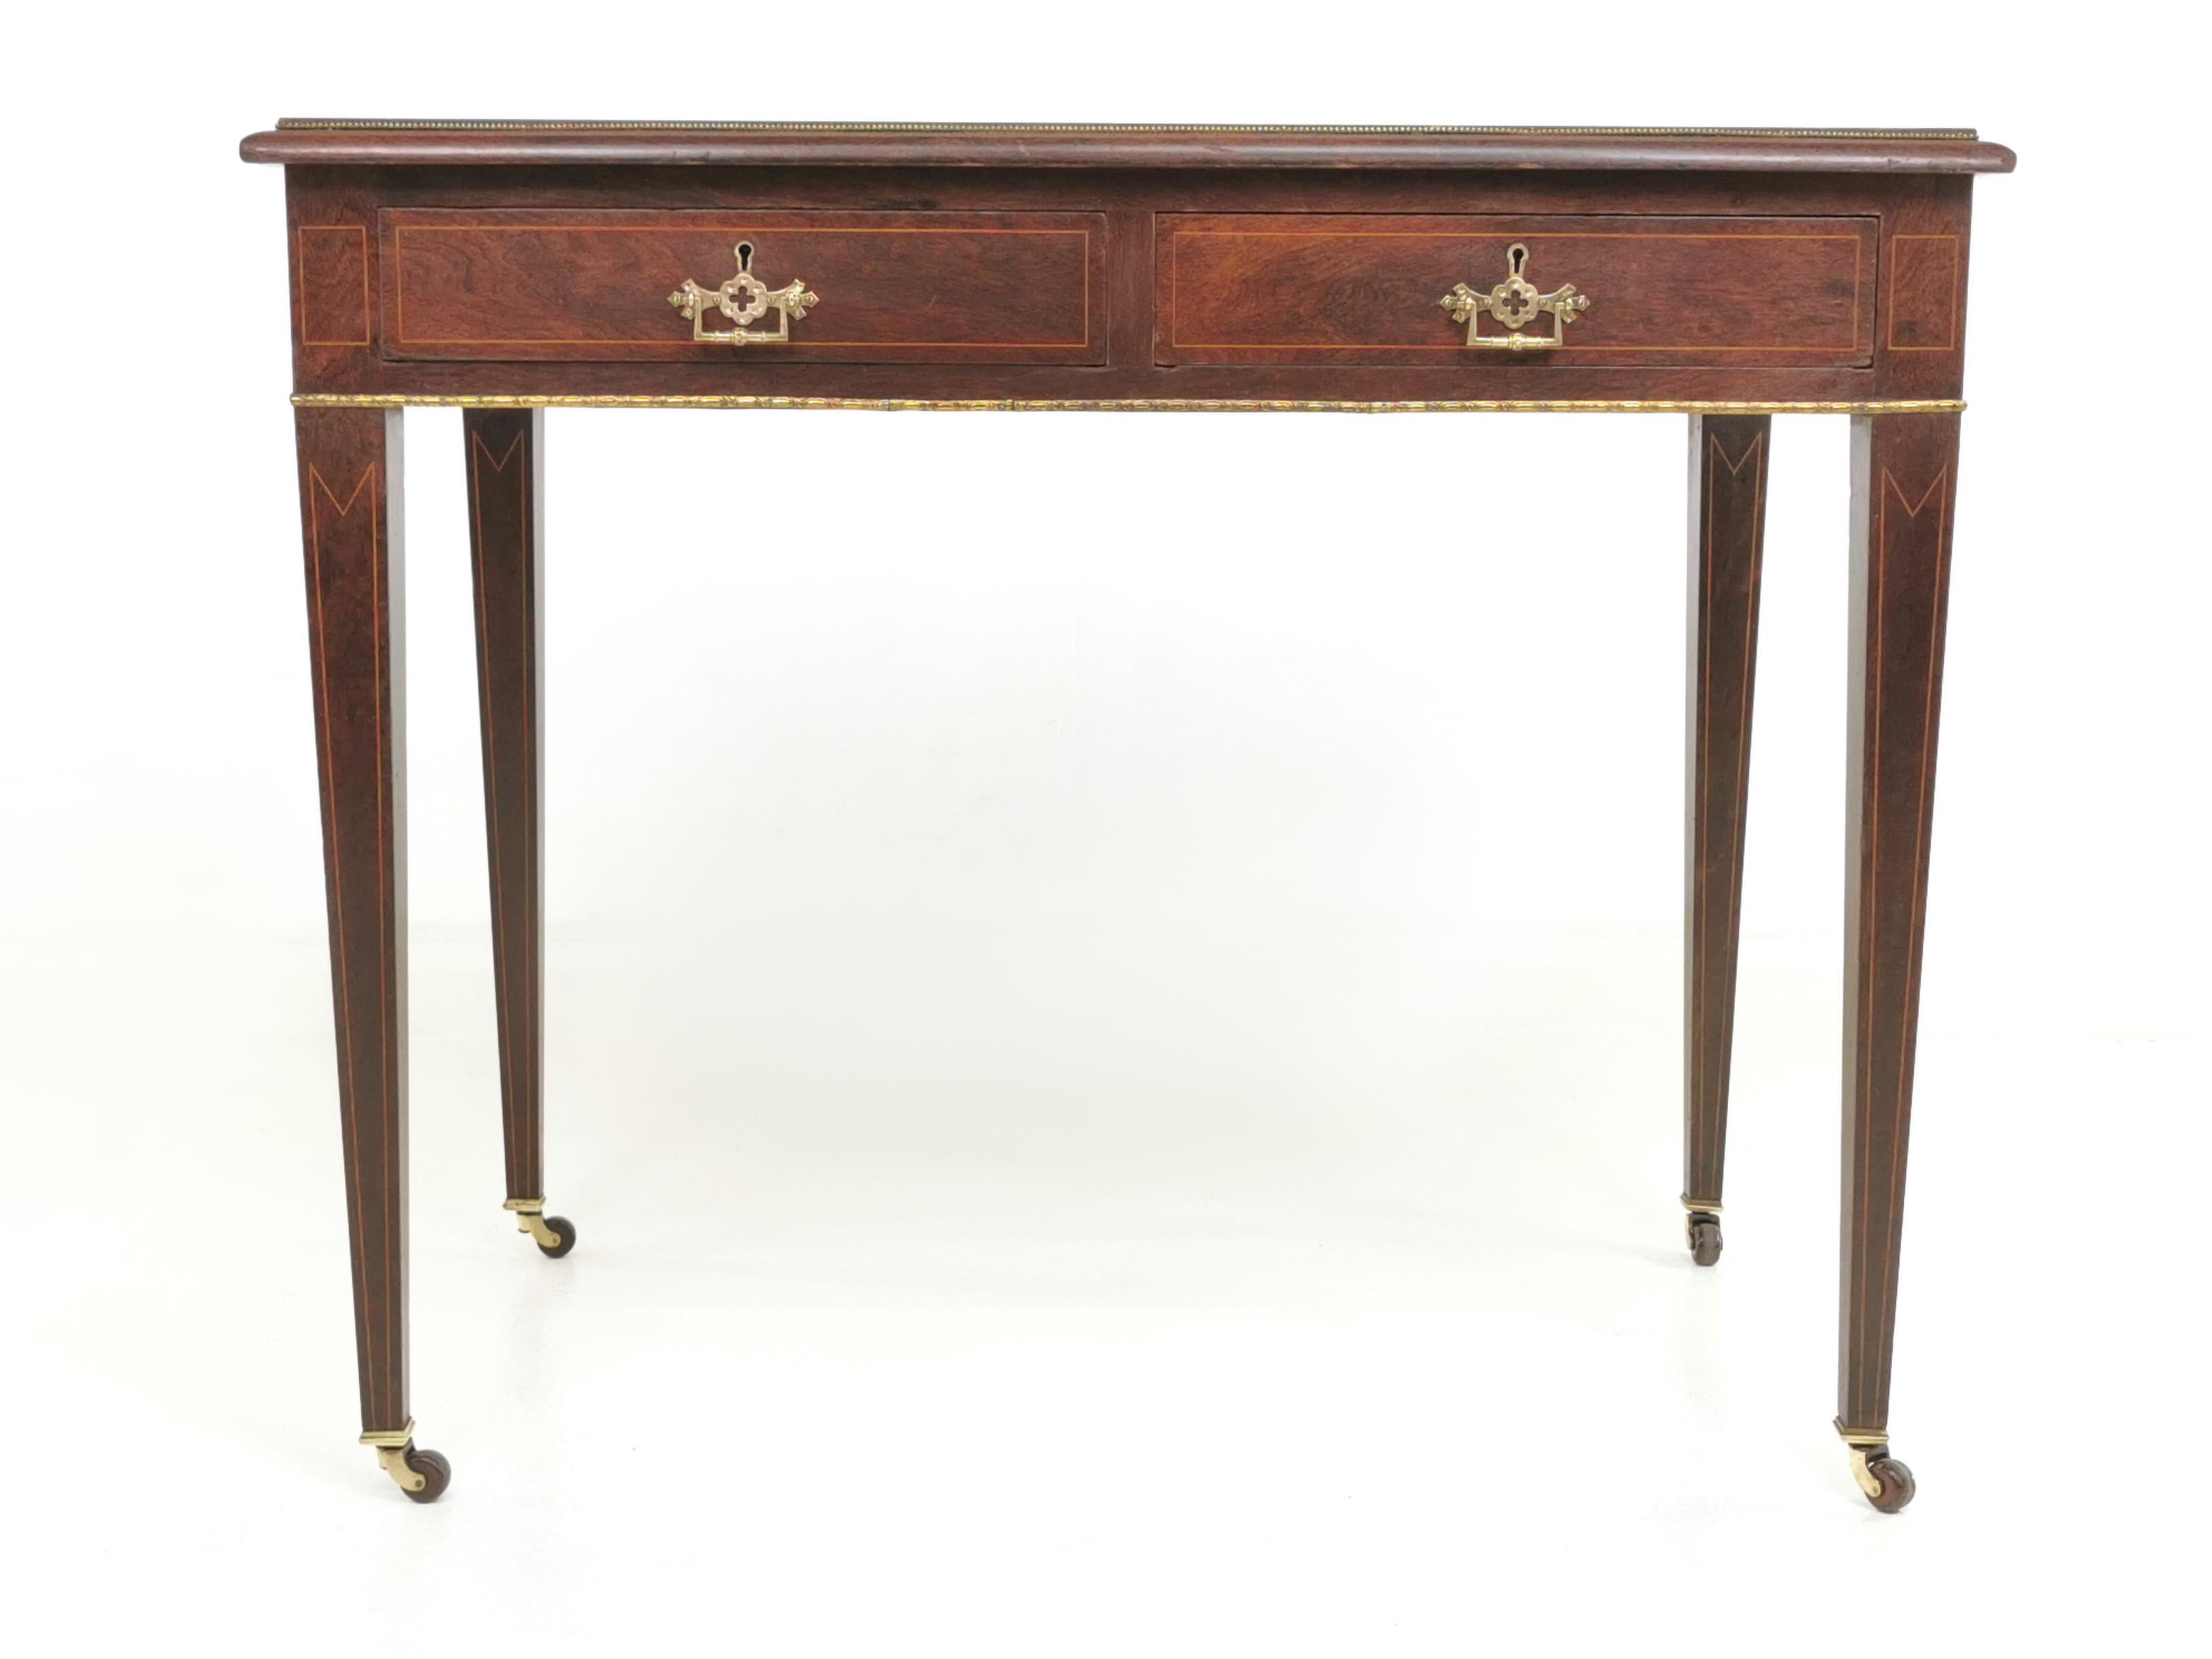 Victorian desk

Victorian mahogany writing desk on castors and with a wonderfully worn tooled leather top. 

Twin drawers fitted with detailed brass pulls. Raised on square tapered supports.

English, circa late 1800s.

Dimensions (cm):?